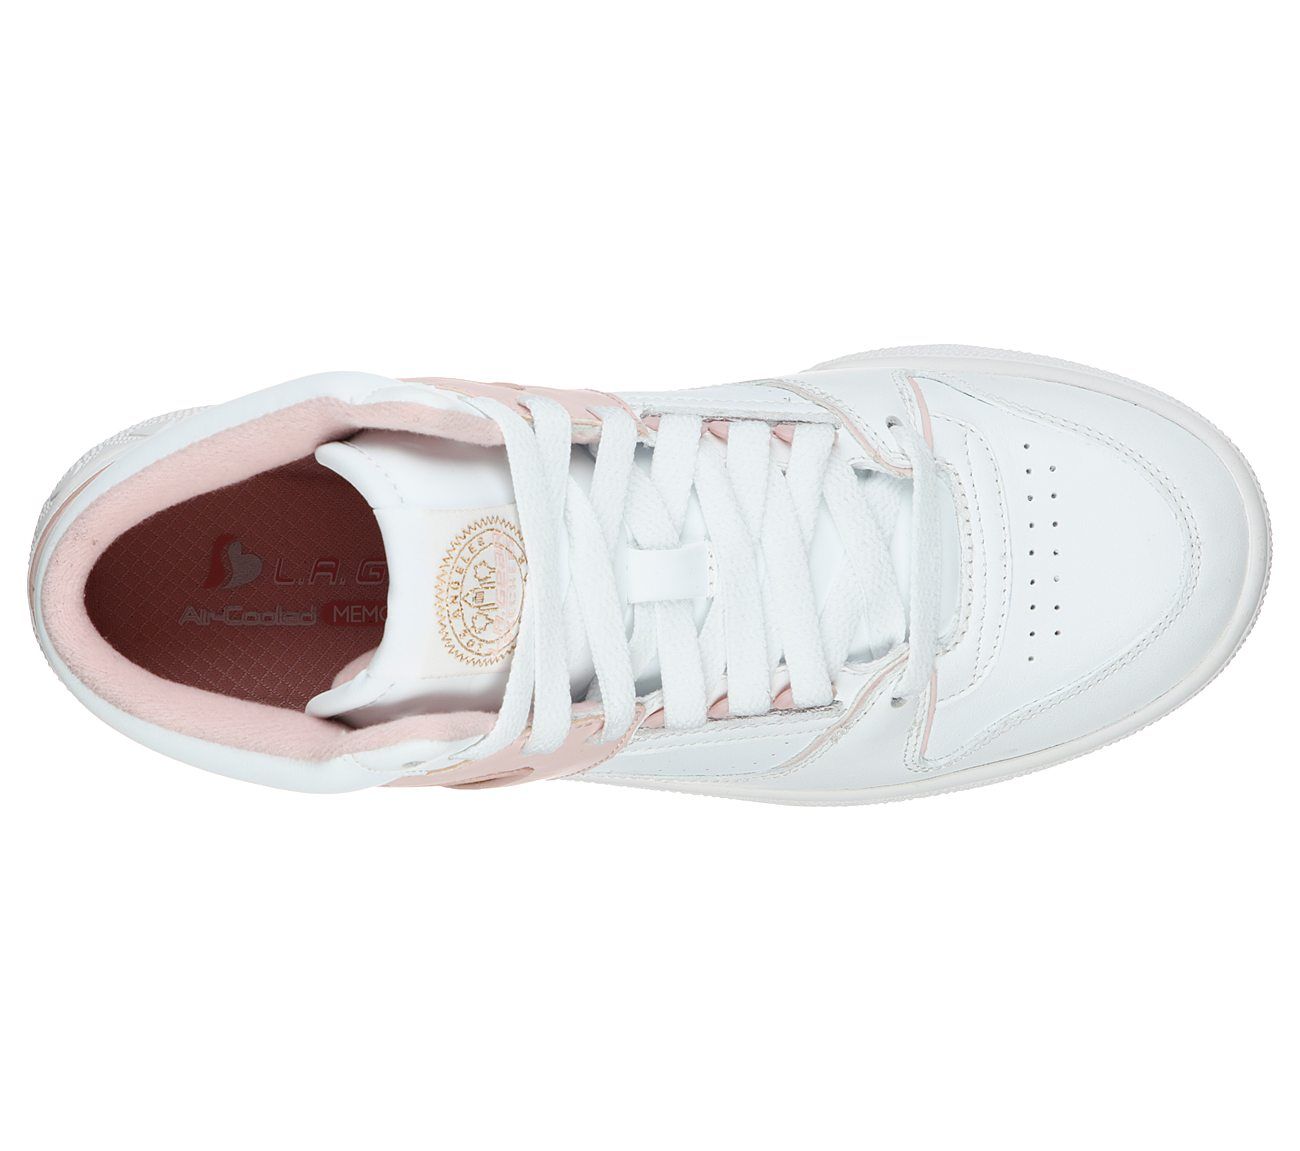 skechers-74312-wht-giay-the-thao-nu-l-a-gear